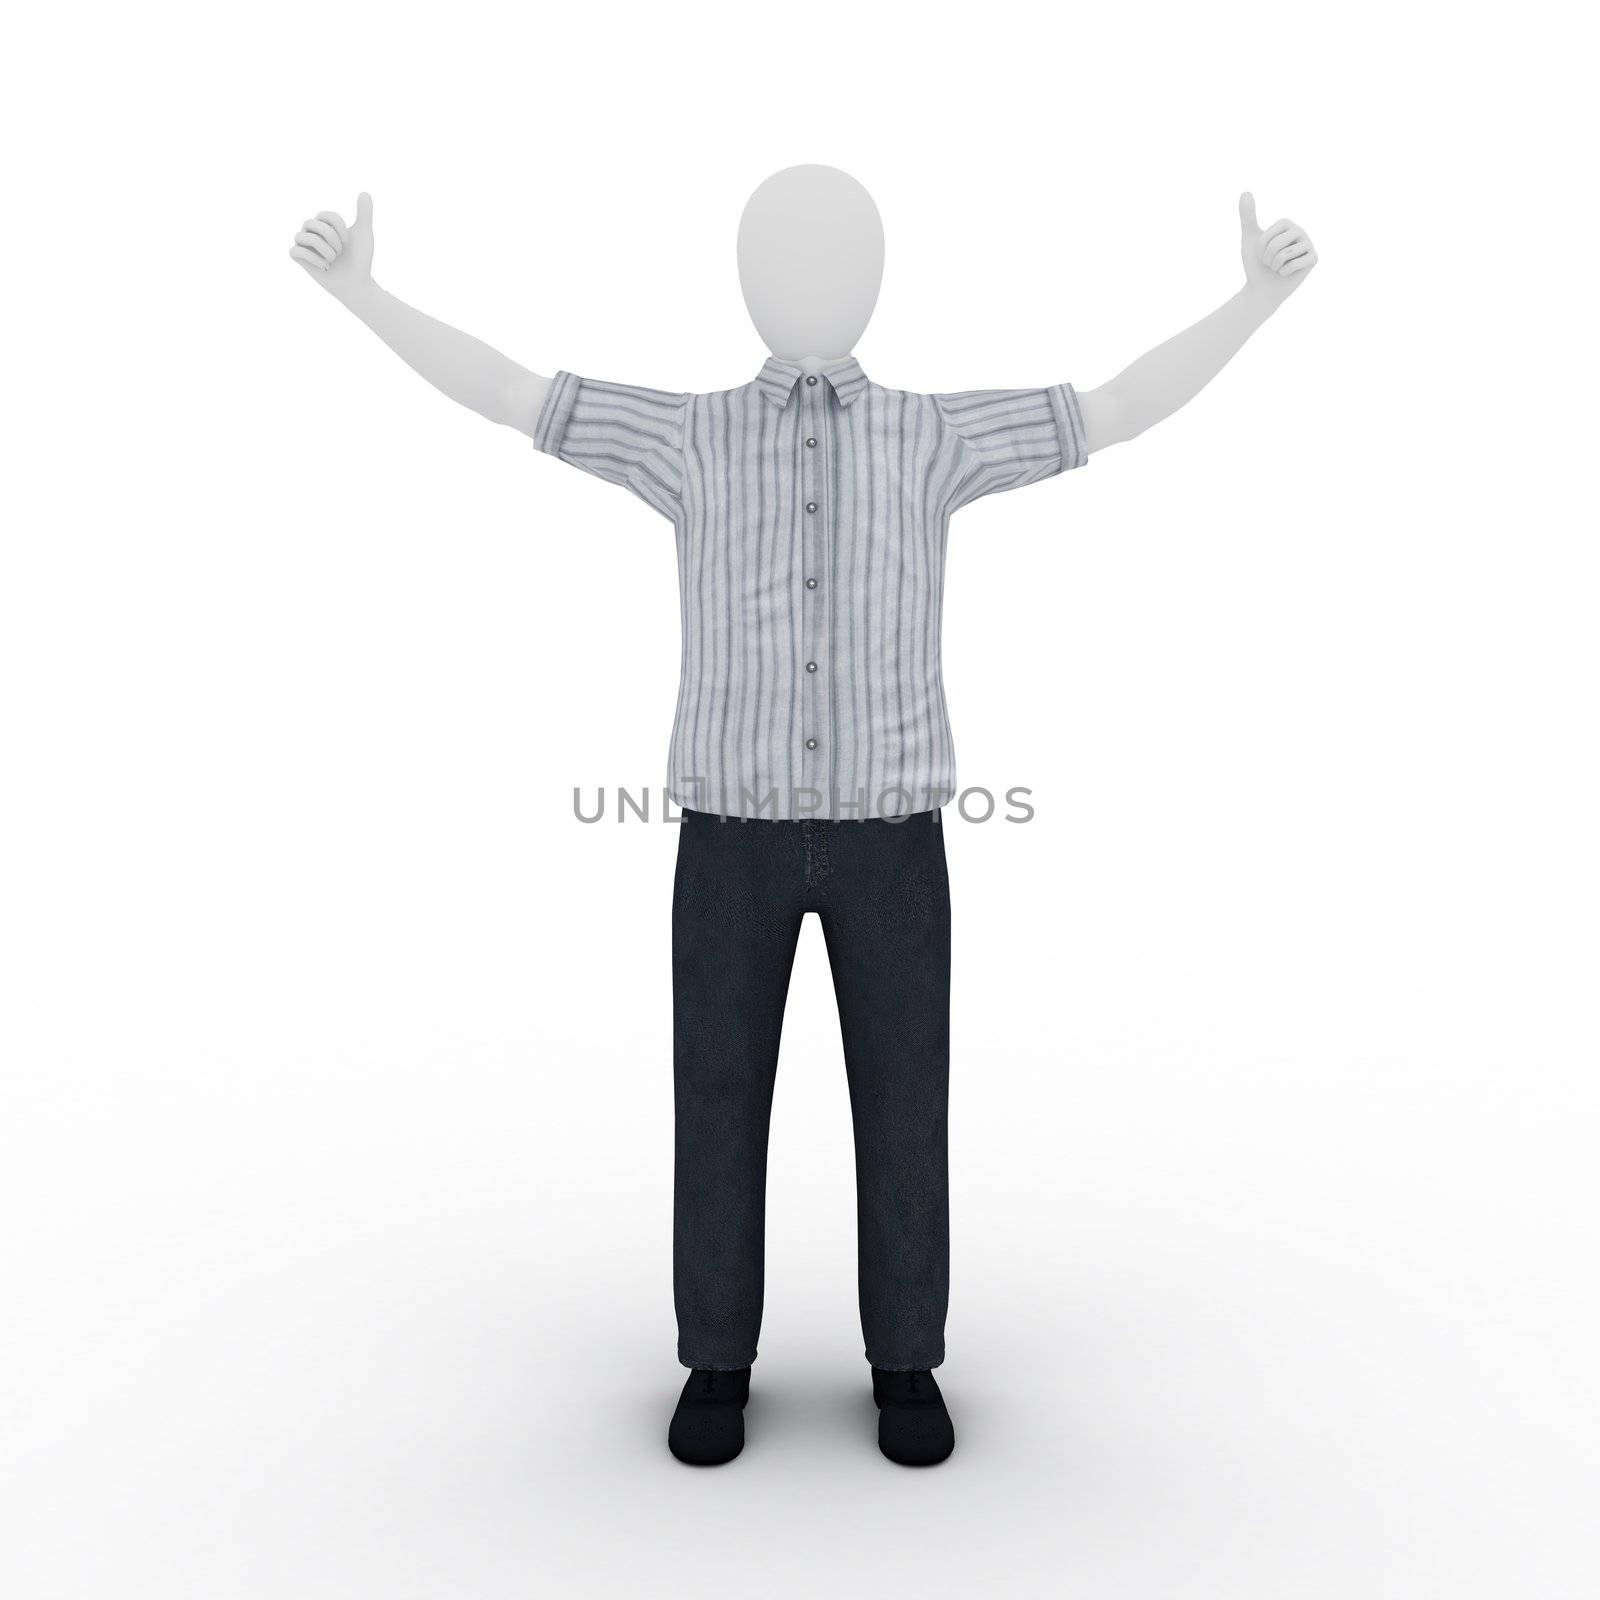 3d human model on white background 